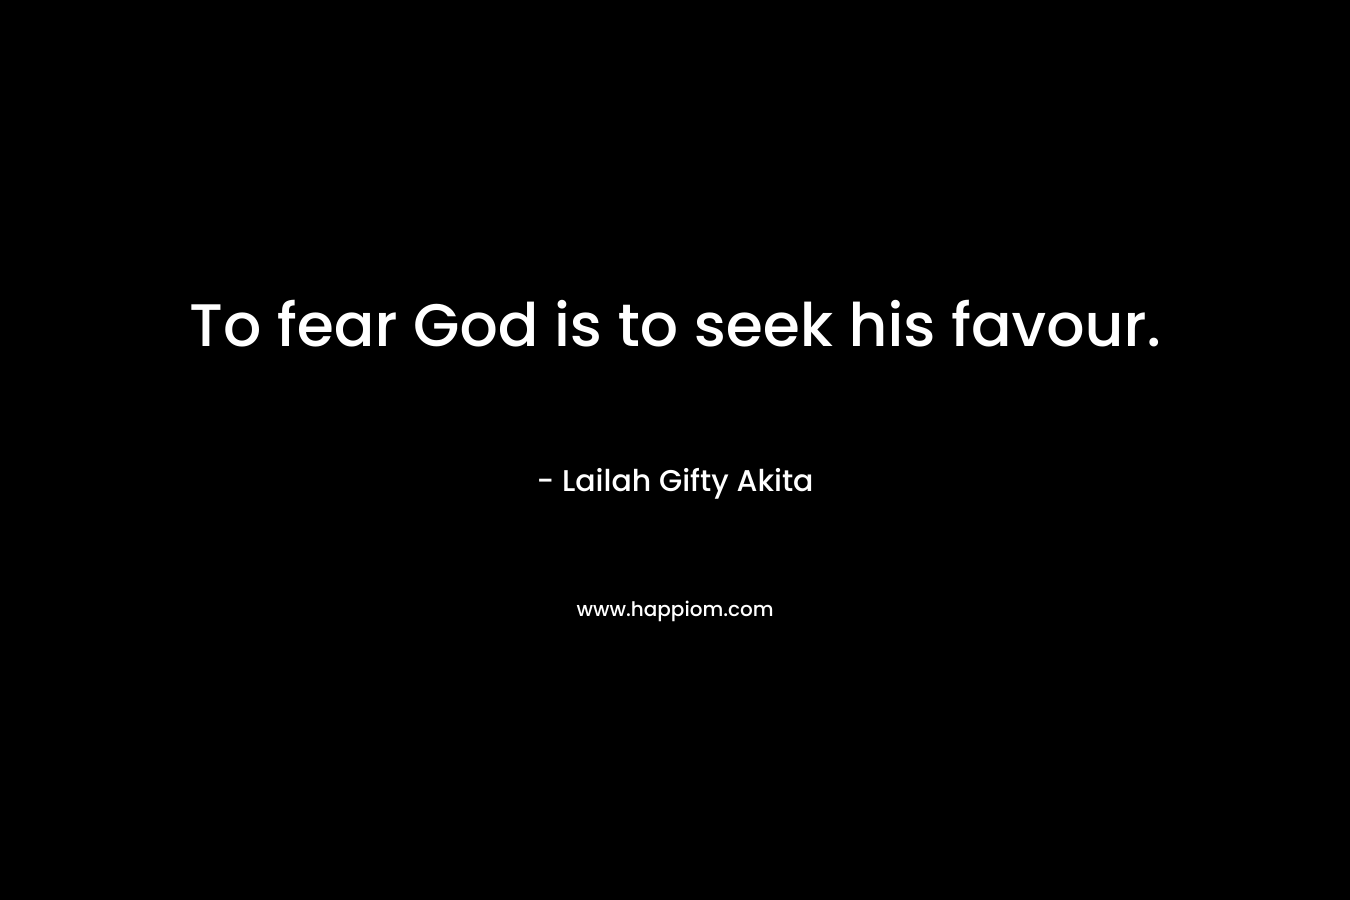 To fear God is to seek his favour.